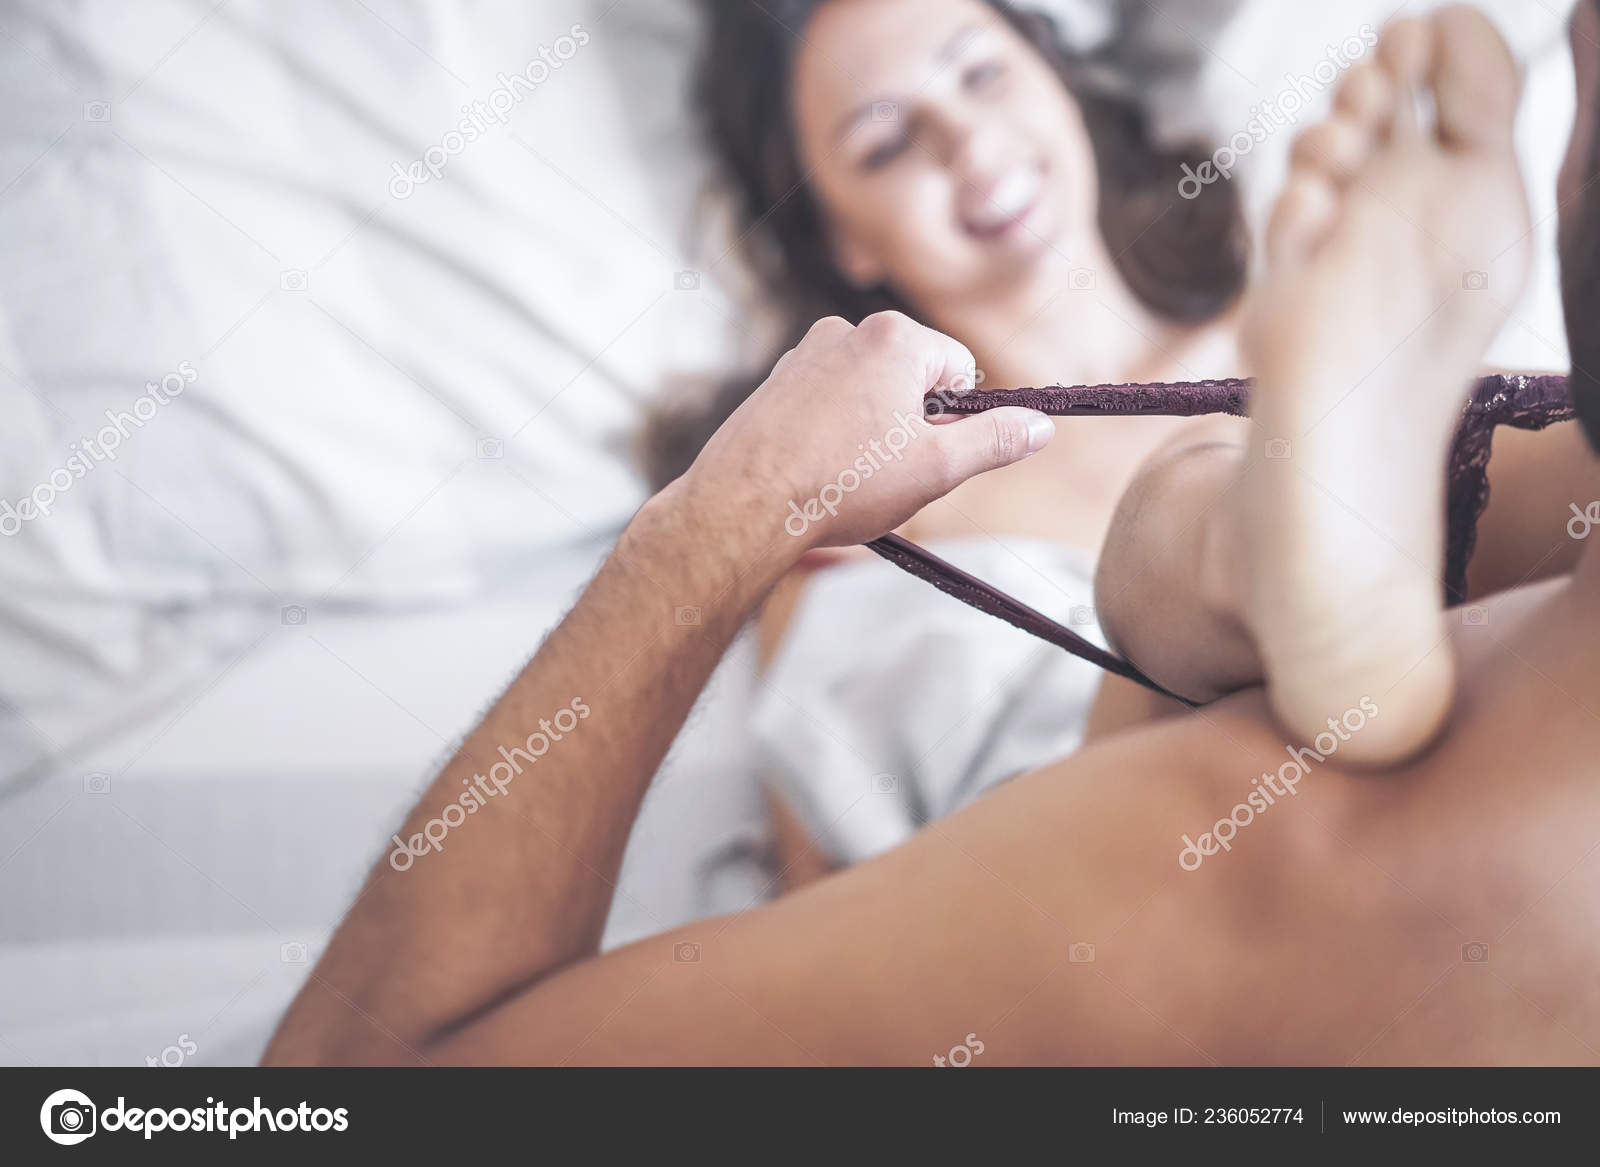 Boyfriend Putting His Girlfriends Panties Having Sex Bed Passionate Couple Stock Photo by ©AlessandroBiascioli 236052774 picture image